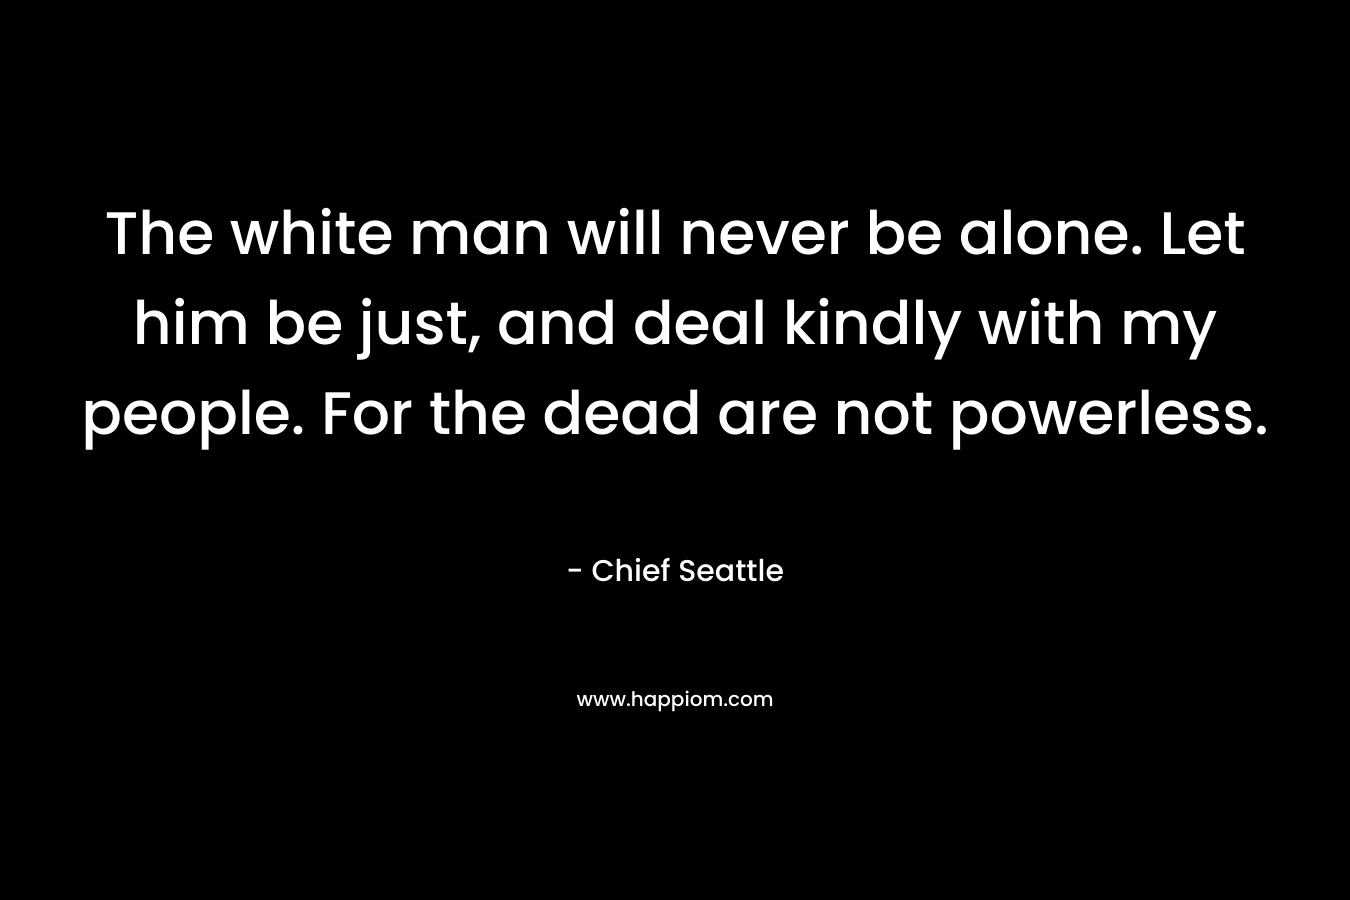 The white man will never be alone. Let him be just, and deal kindly with my people. For the dead are not powerless. – Chief Seattle